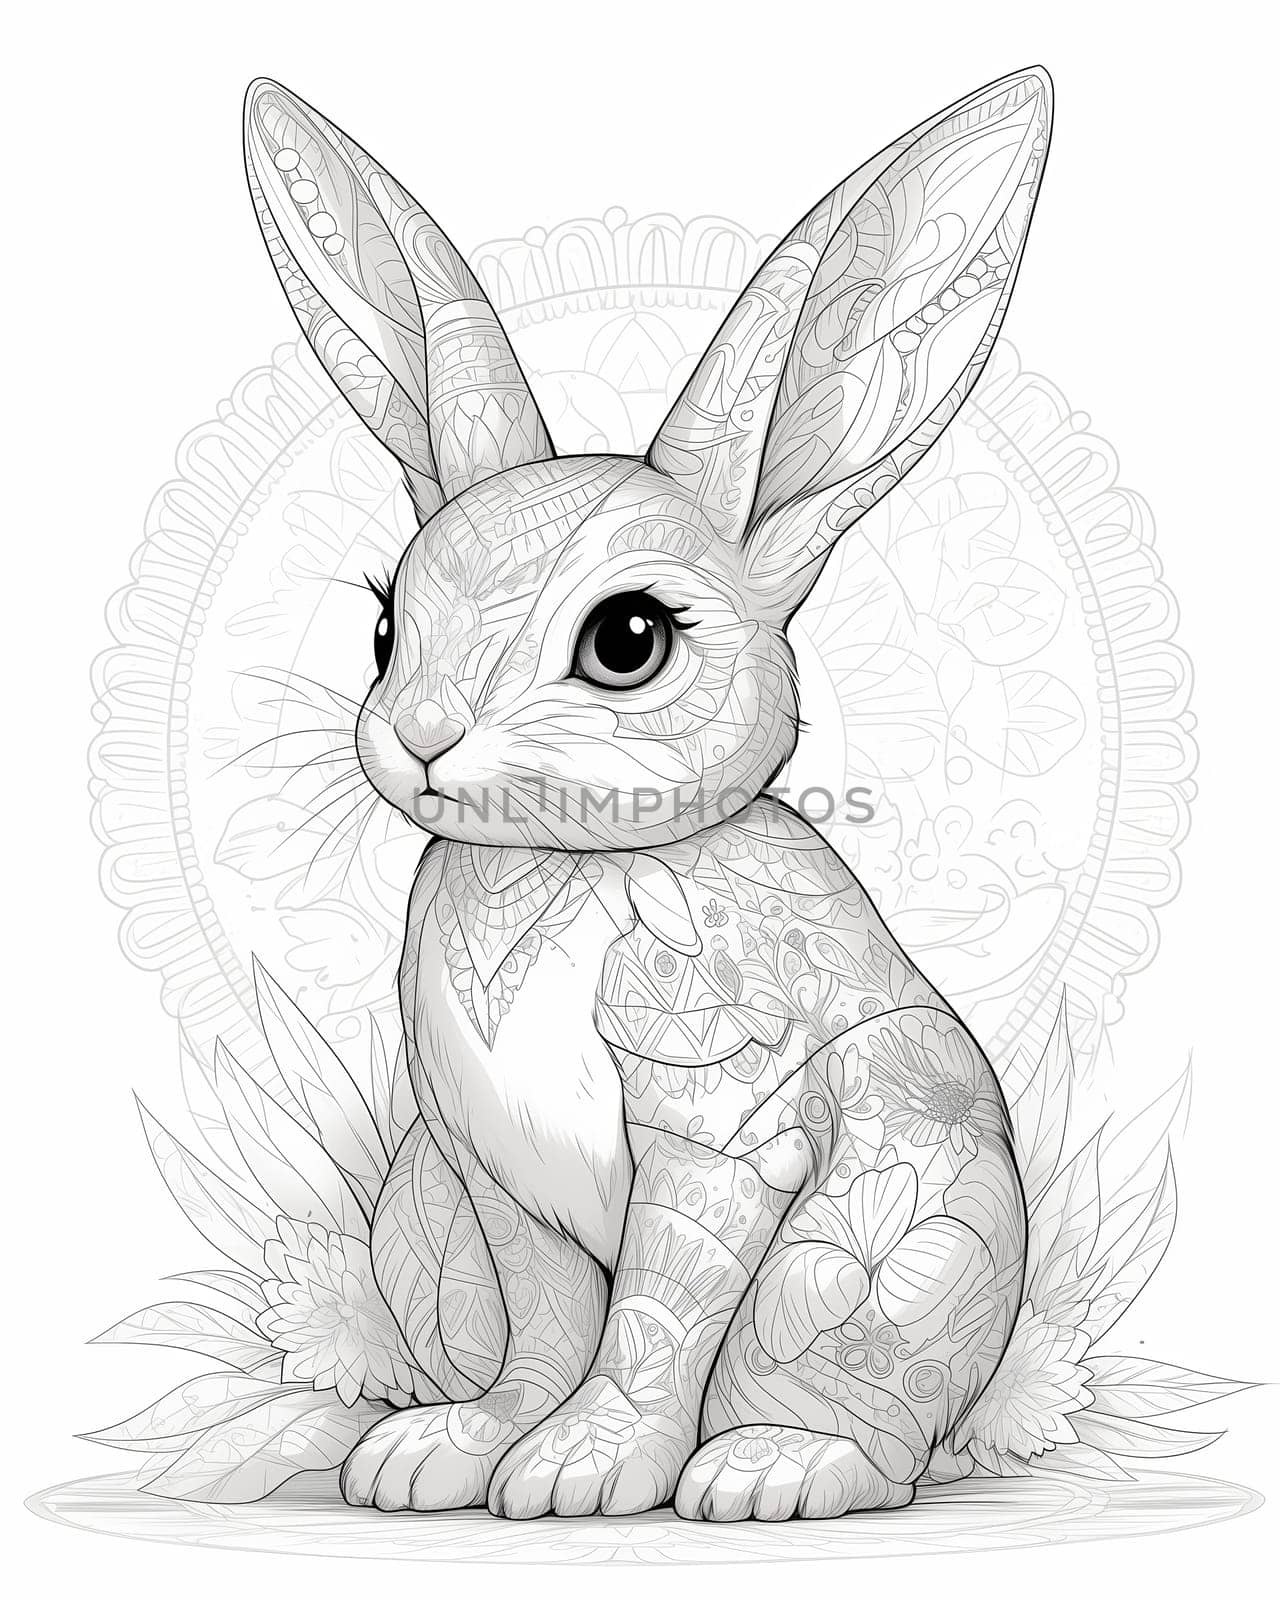 Coloring book for kids, animal coloring, hare. by Fischeron